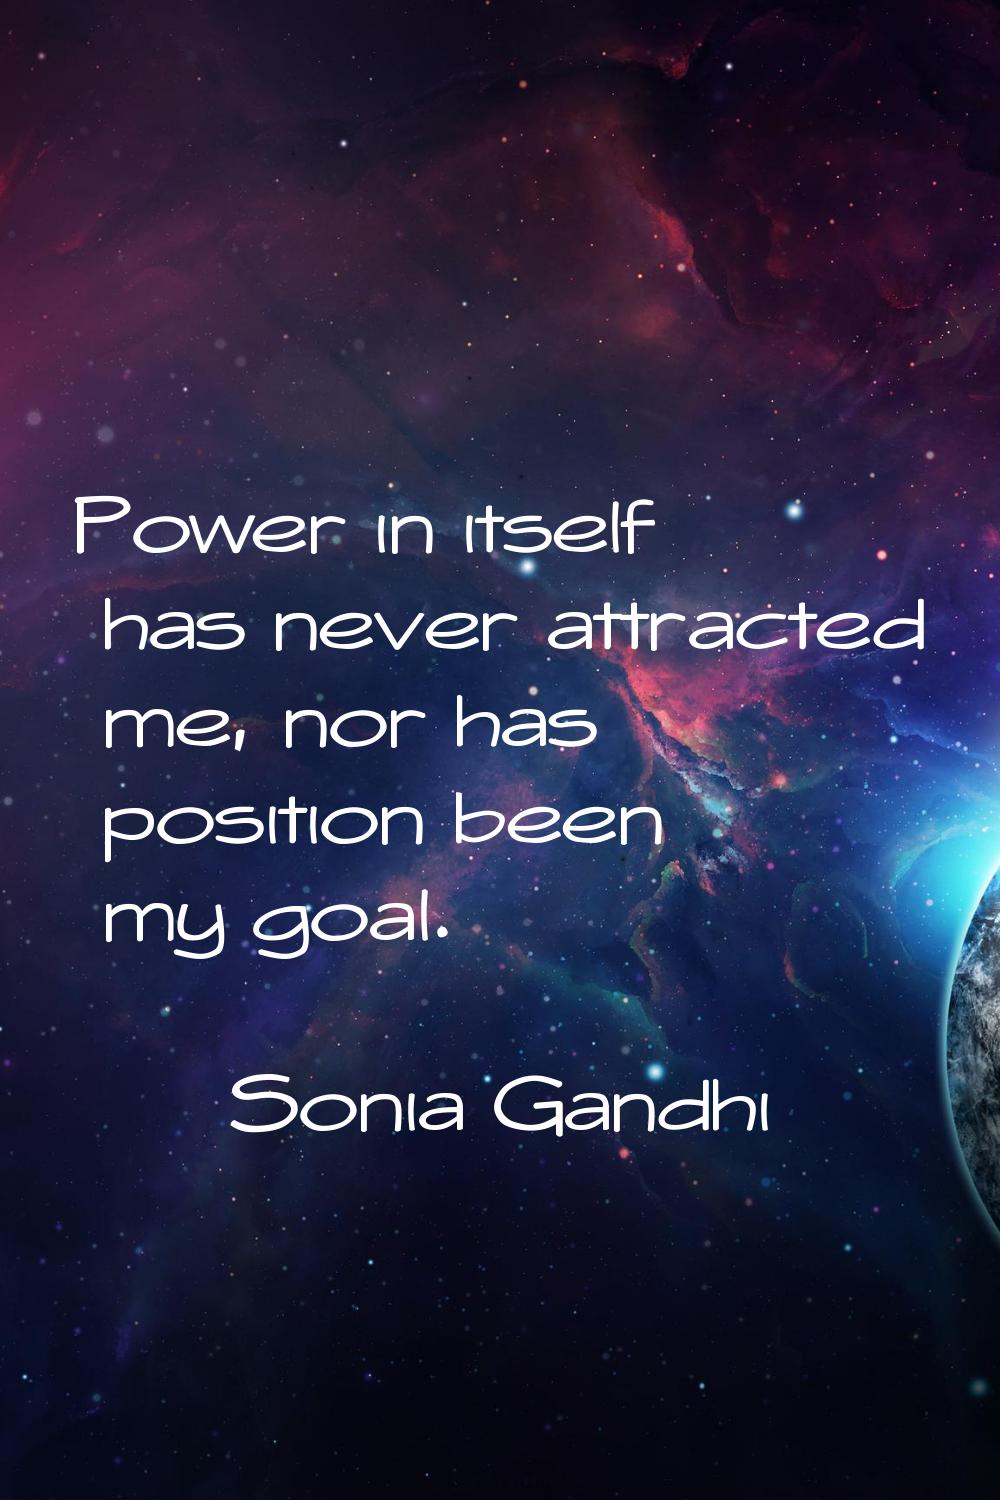 Power in itself has never attracted me, nor has position been my goal.